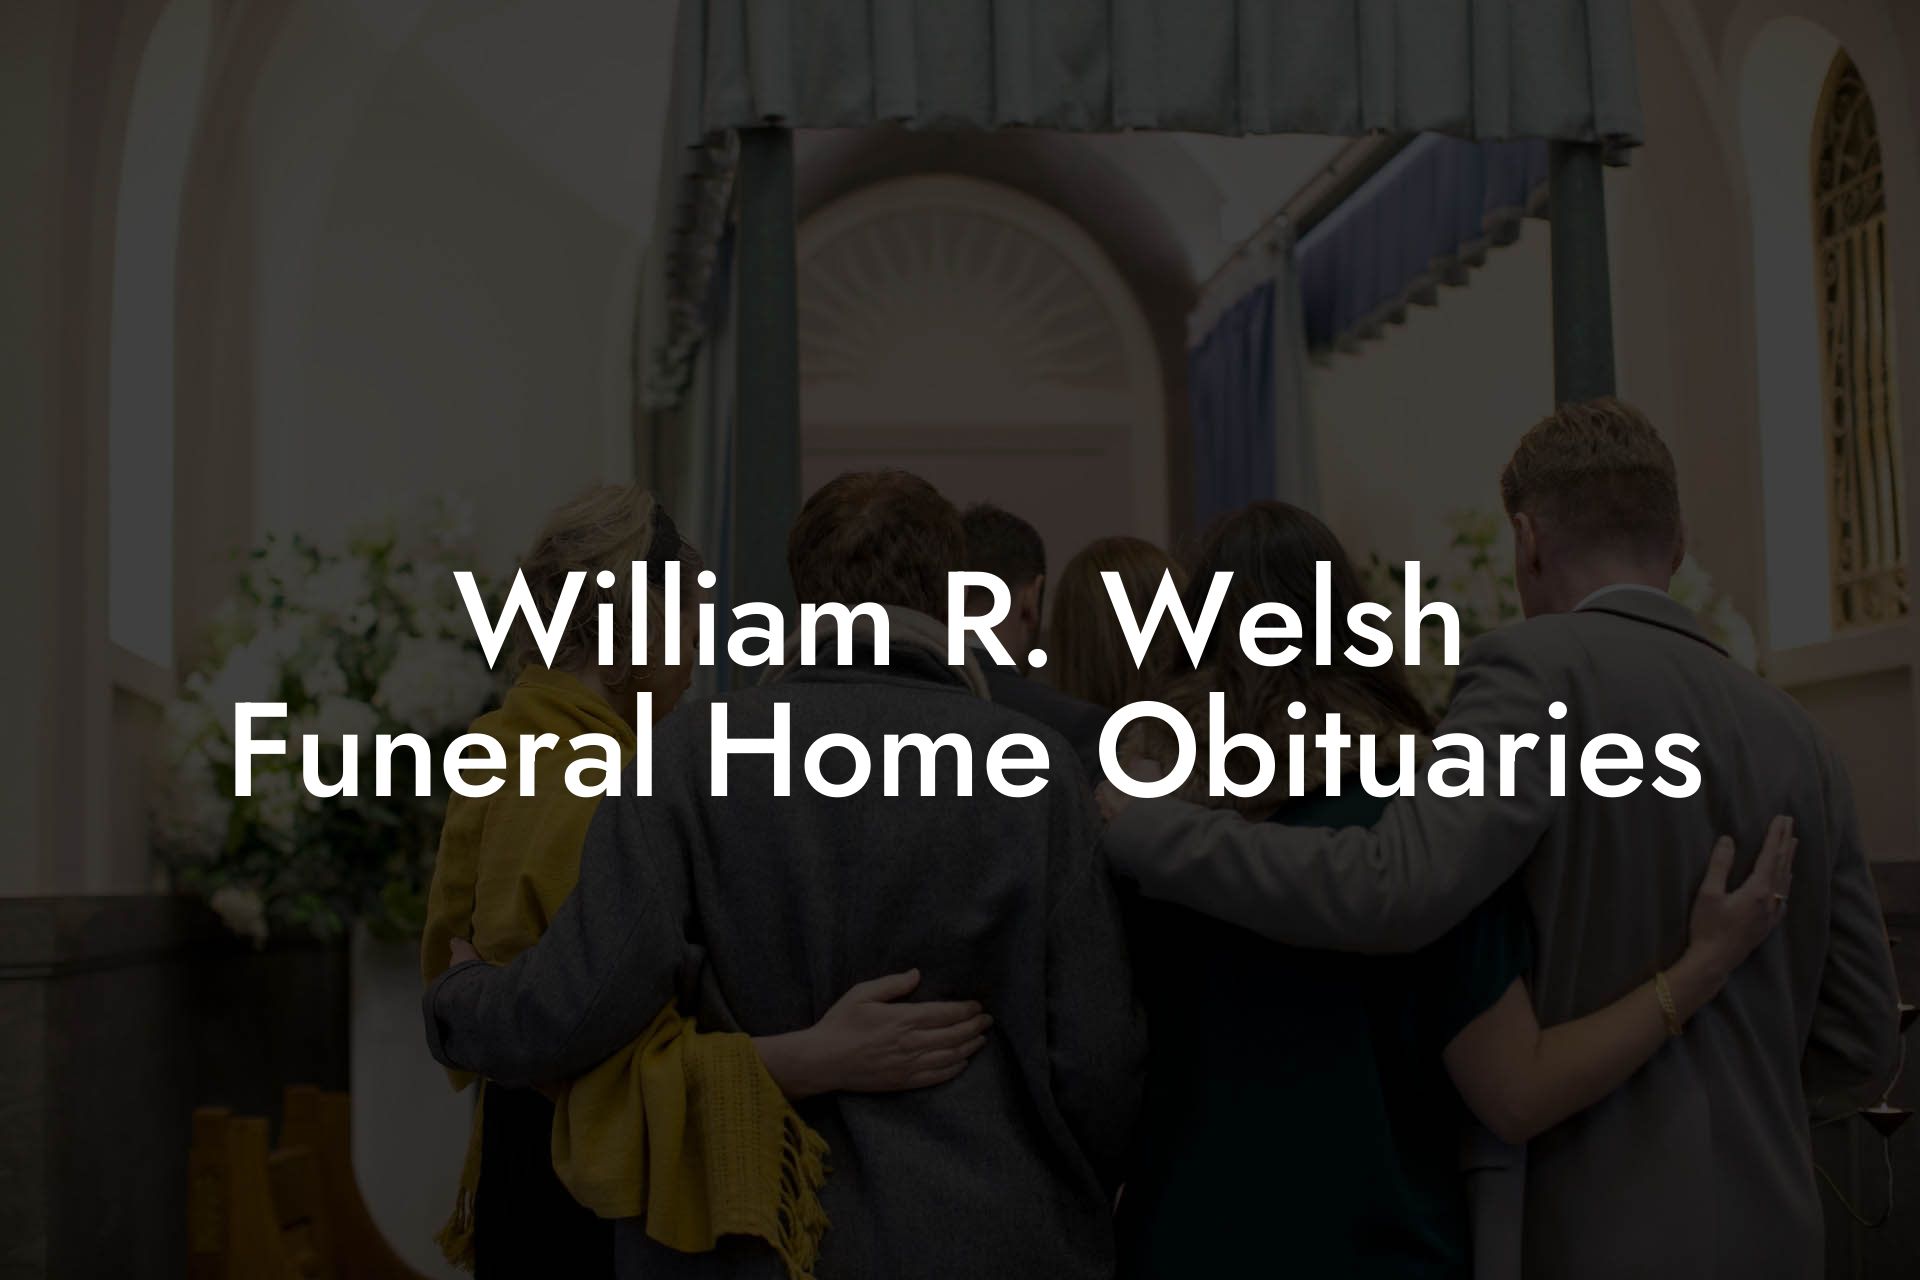 William R. Welsh Funeral Home Obituaries